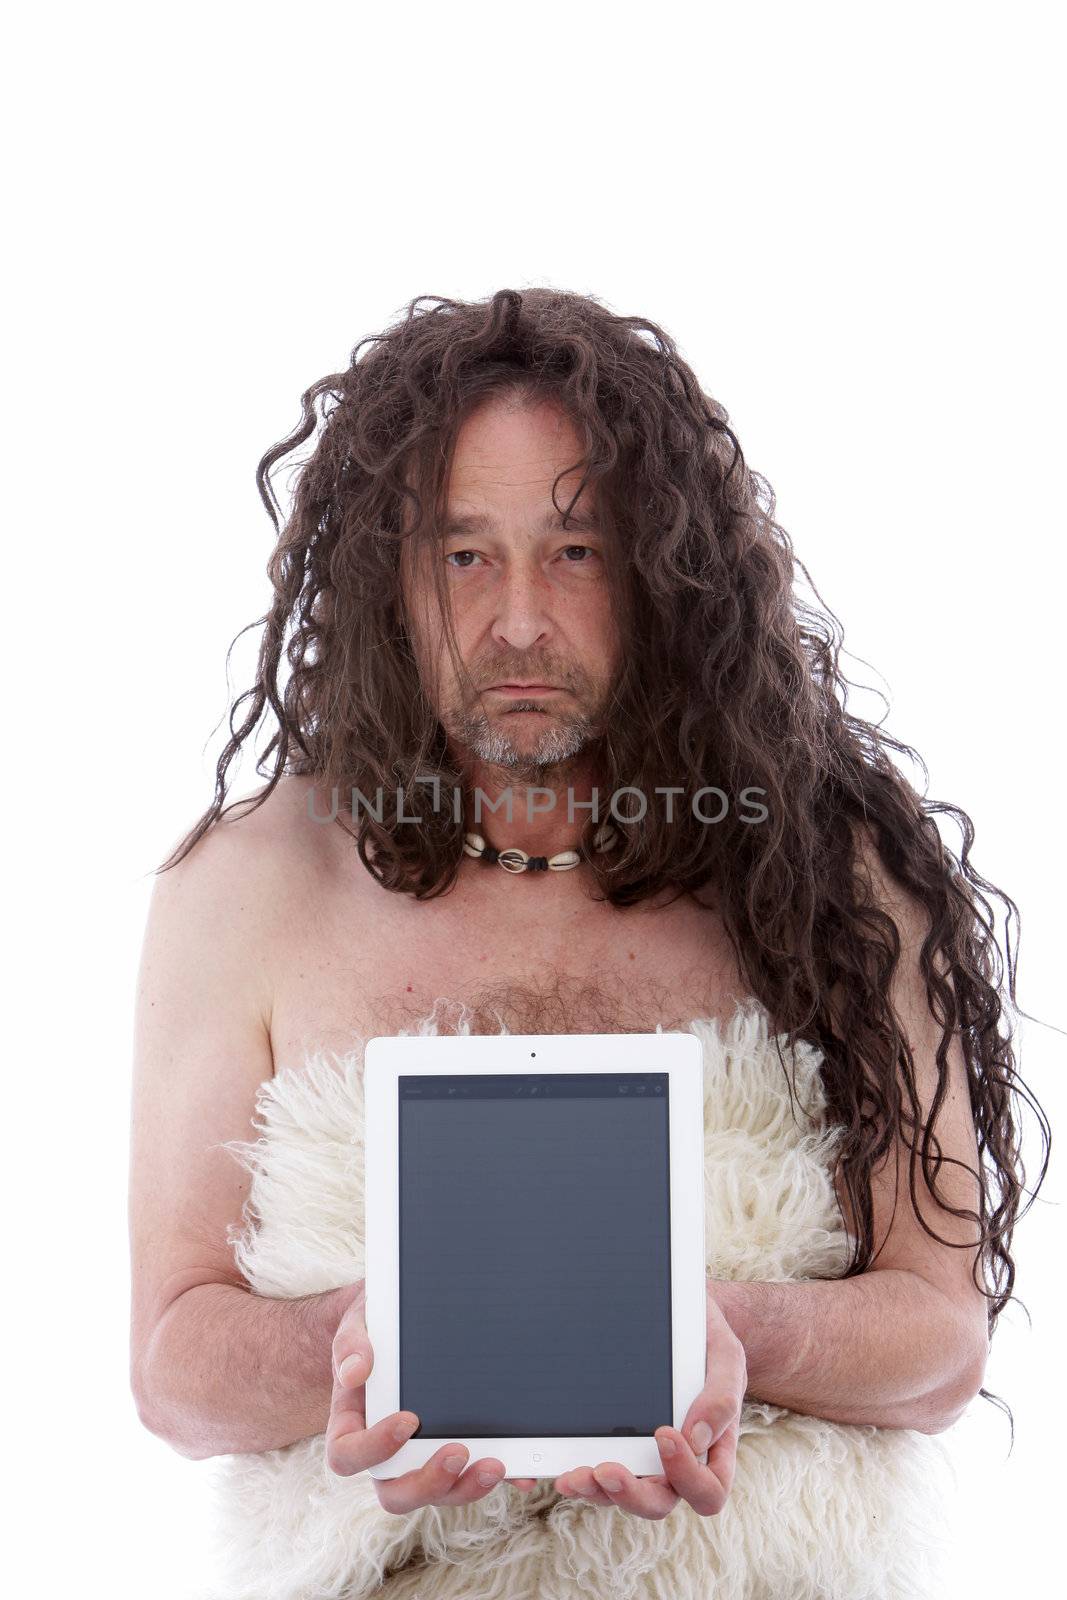 Funny primitive man holding a PC tablet by Farina6000